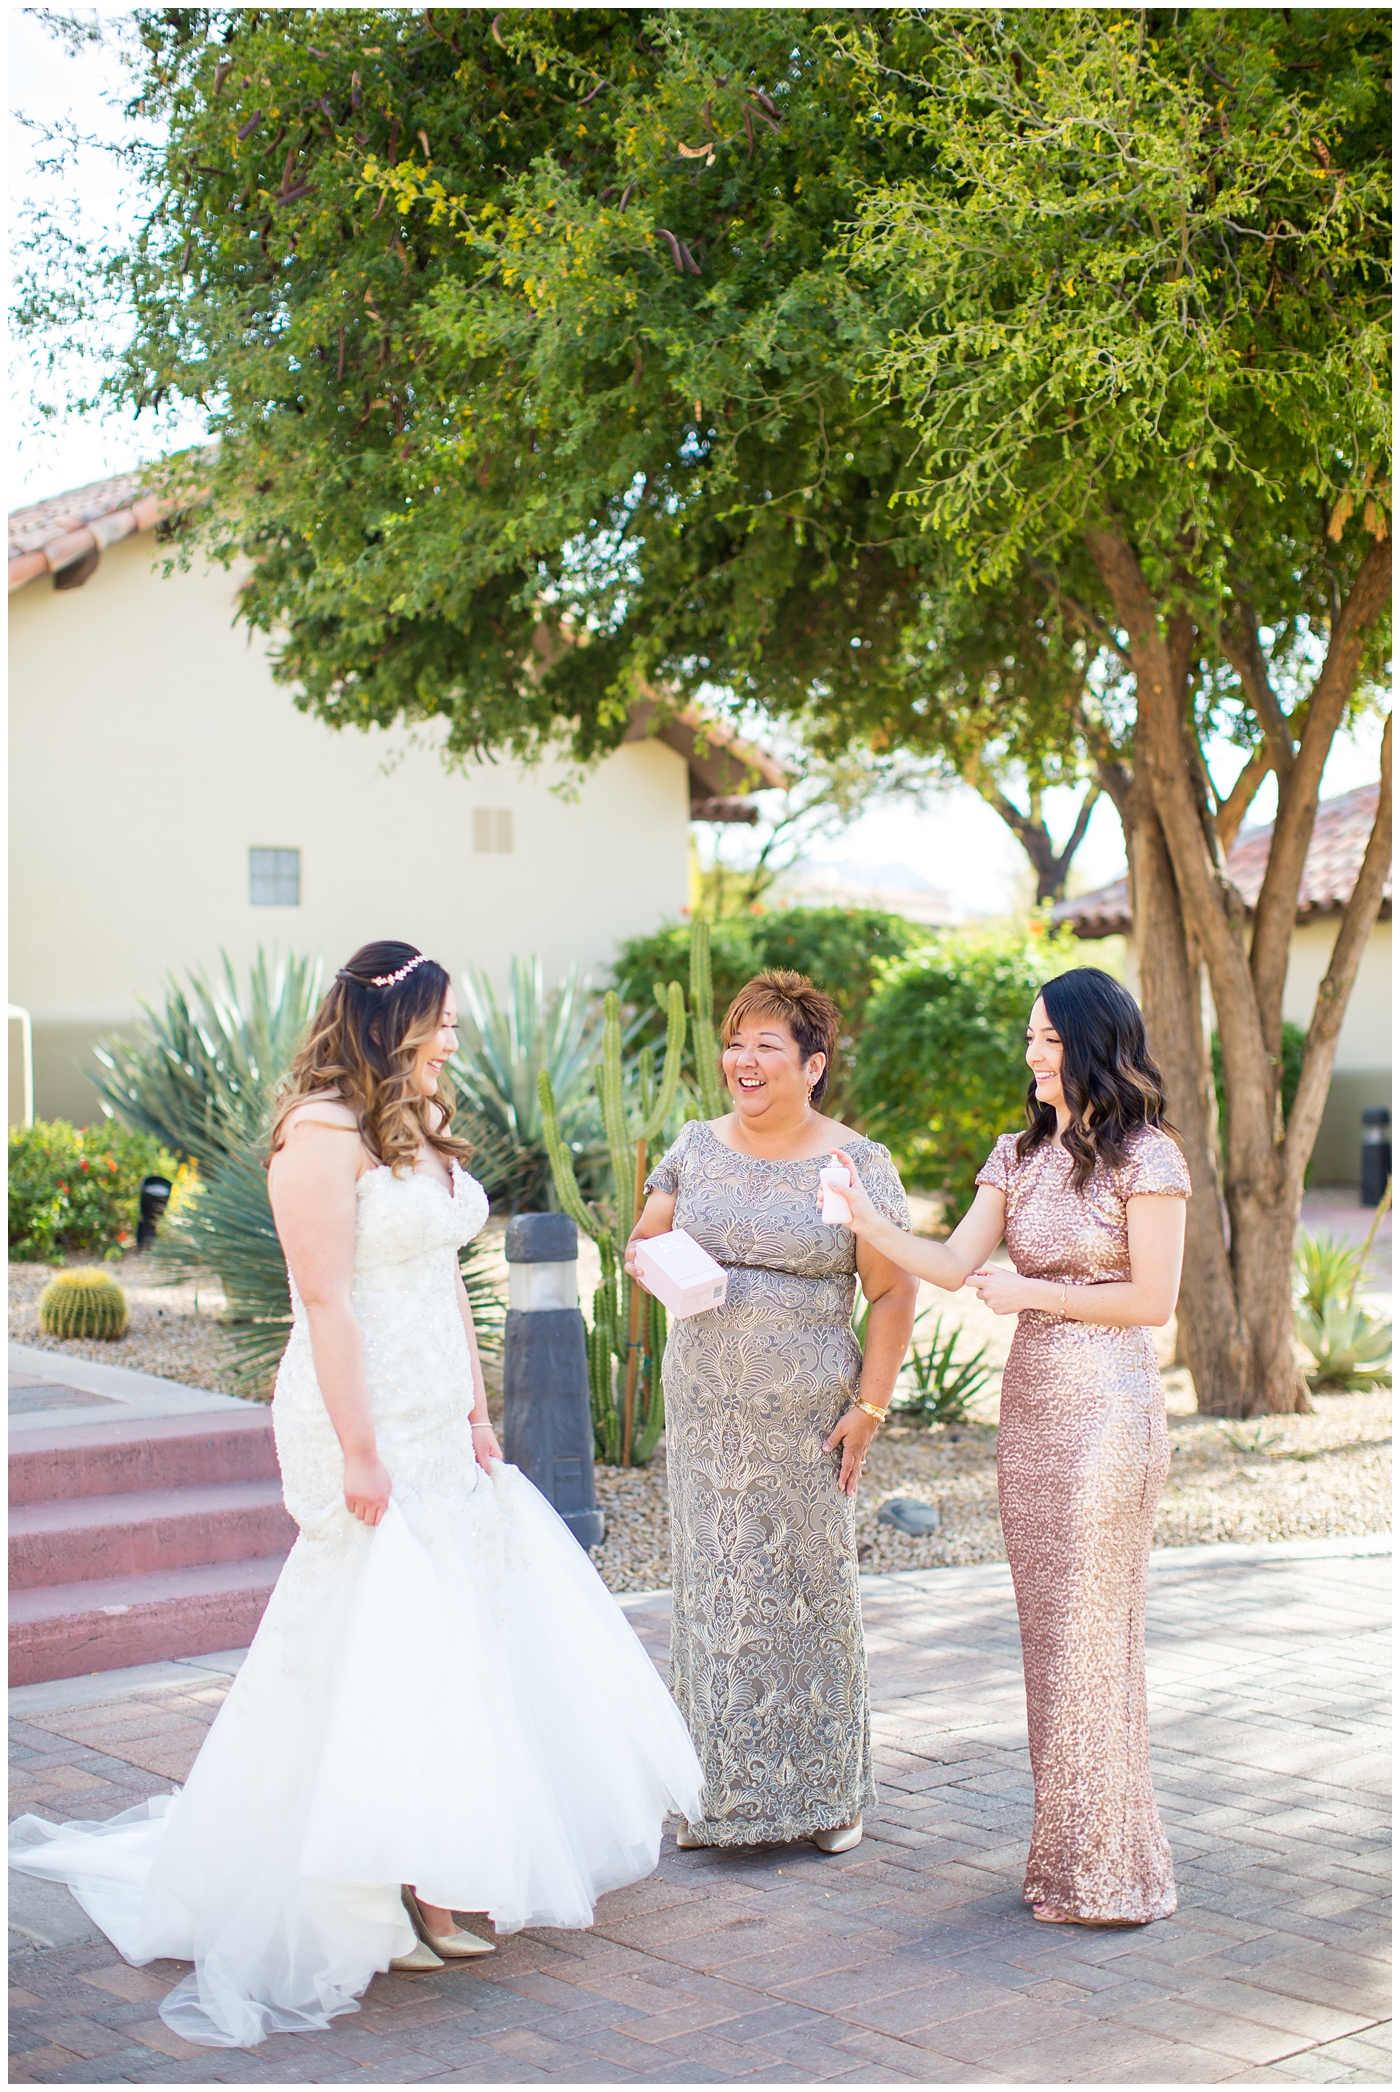 bride in strapless wedding dress with beads and shiny sparkle tool getting ready with help of mother and bridesmaid in pink sequin dress on wedding day